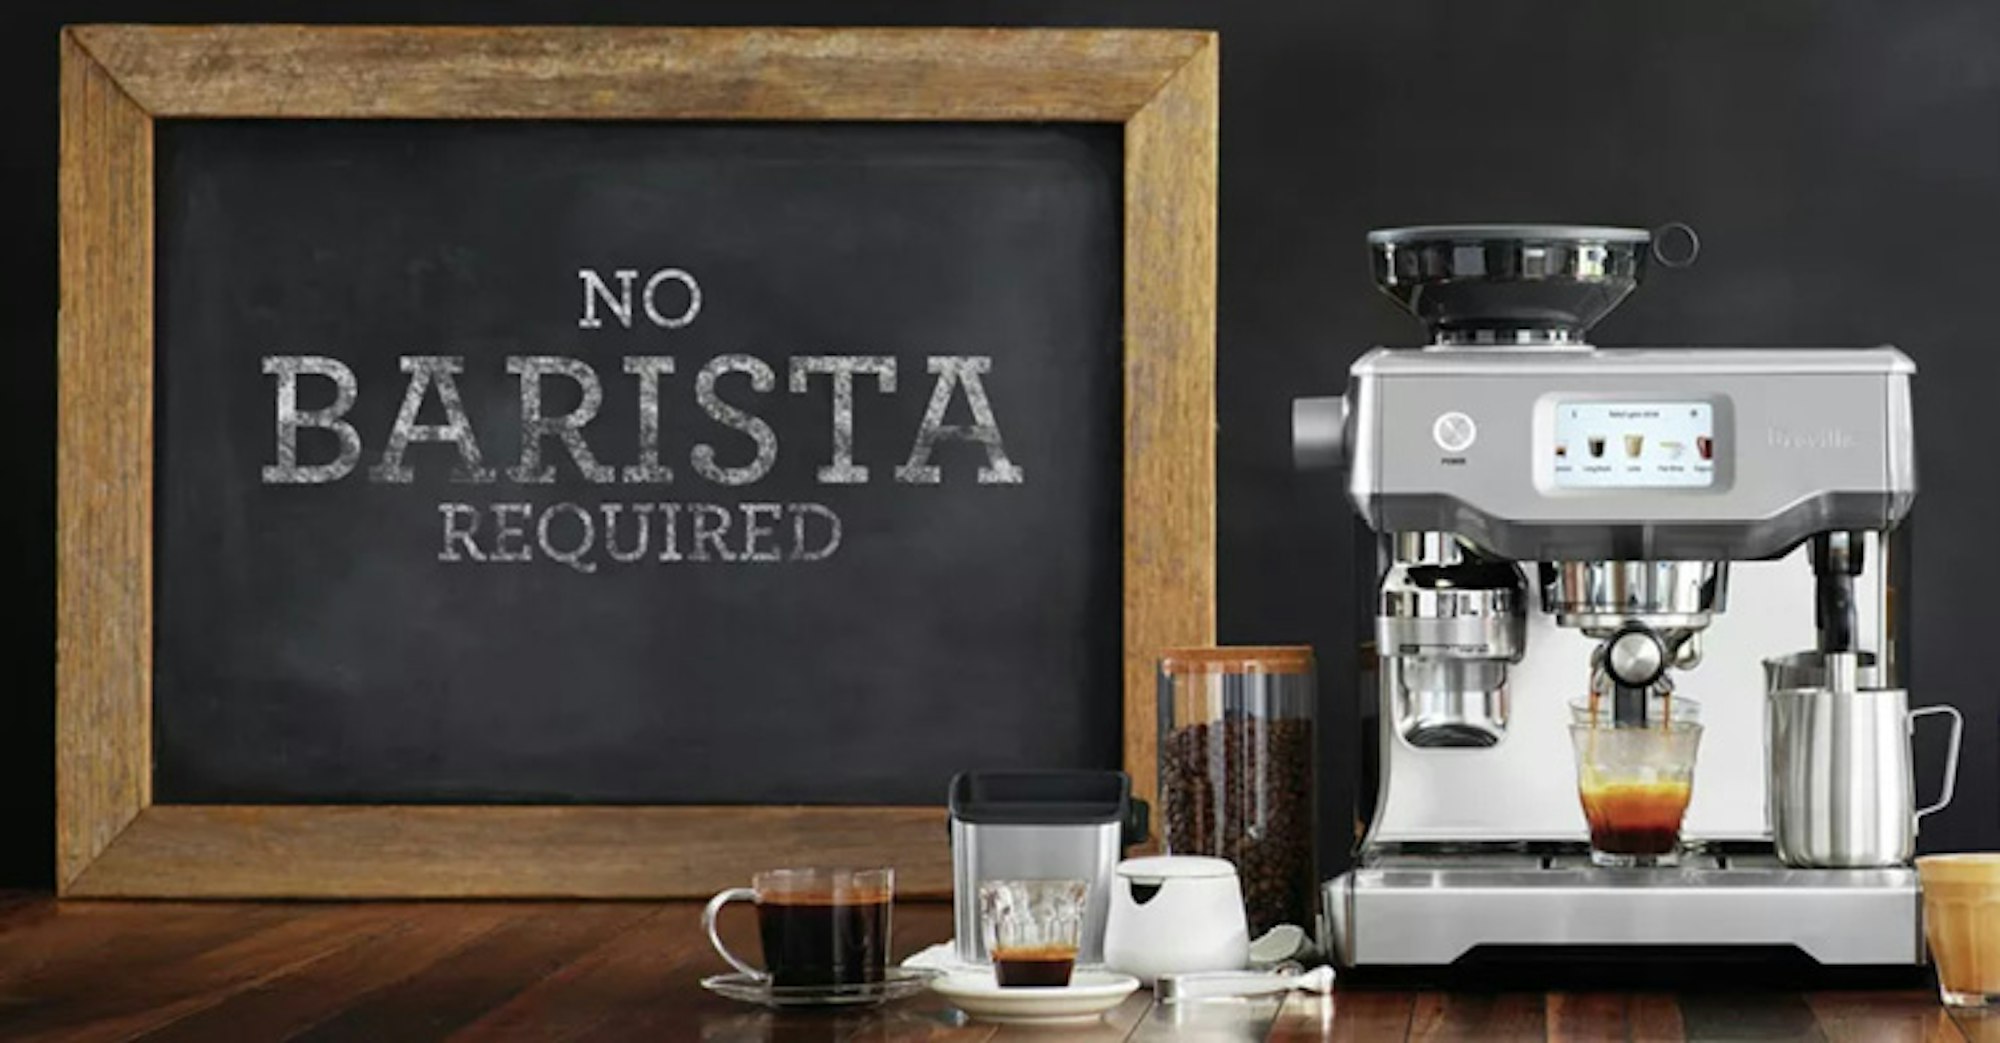 high-quality coffee machines and kitchen appliances